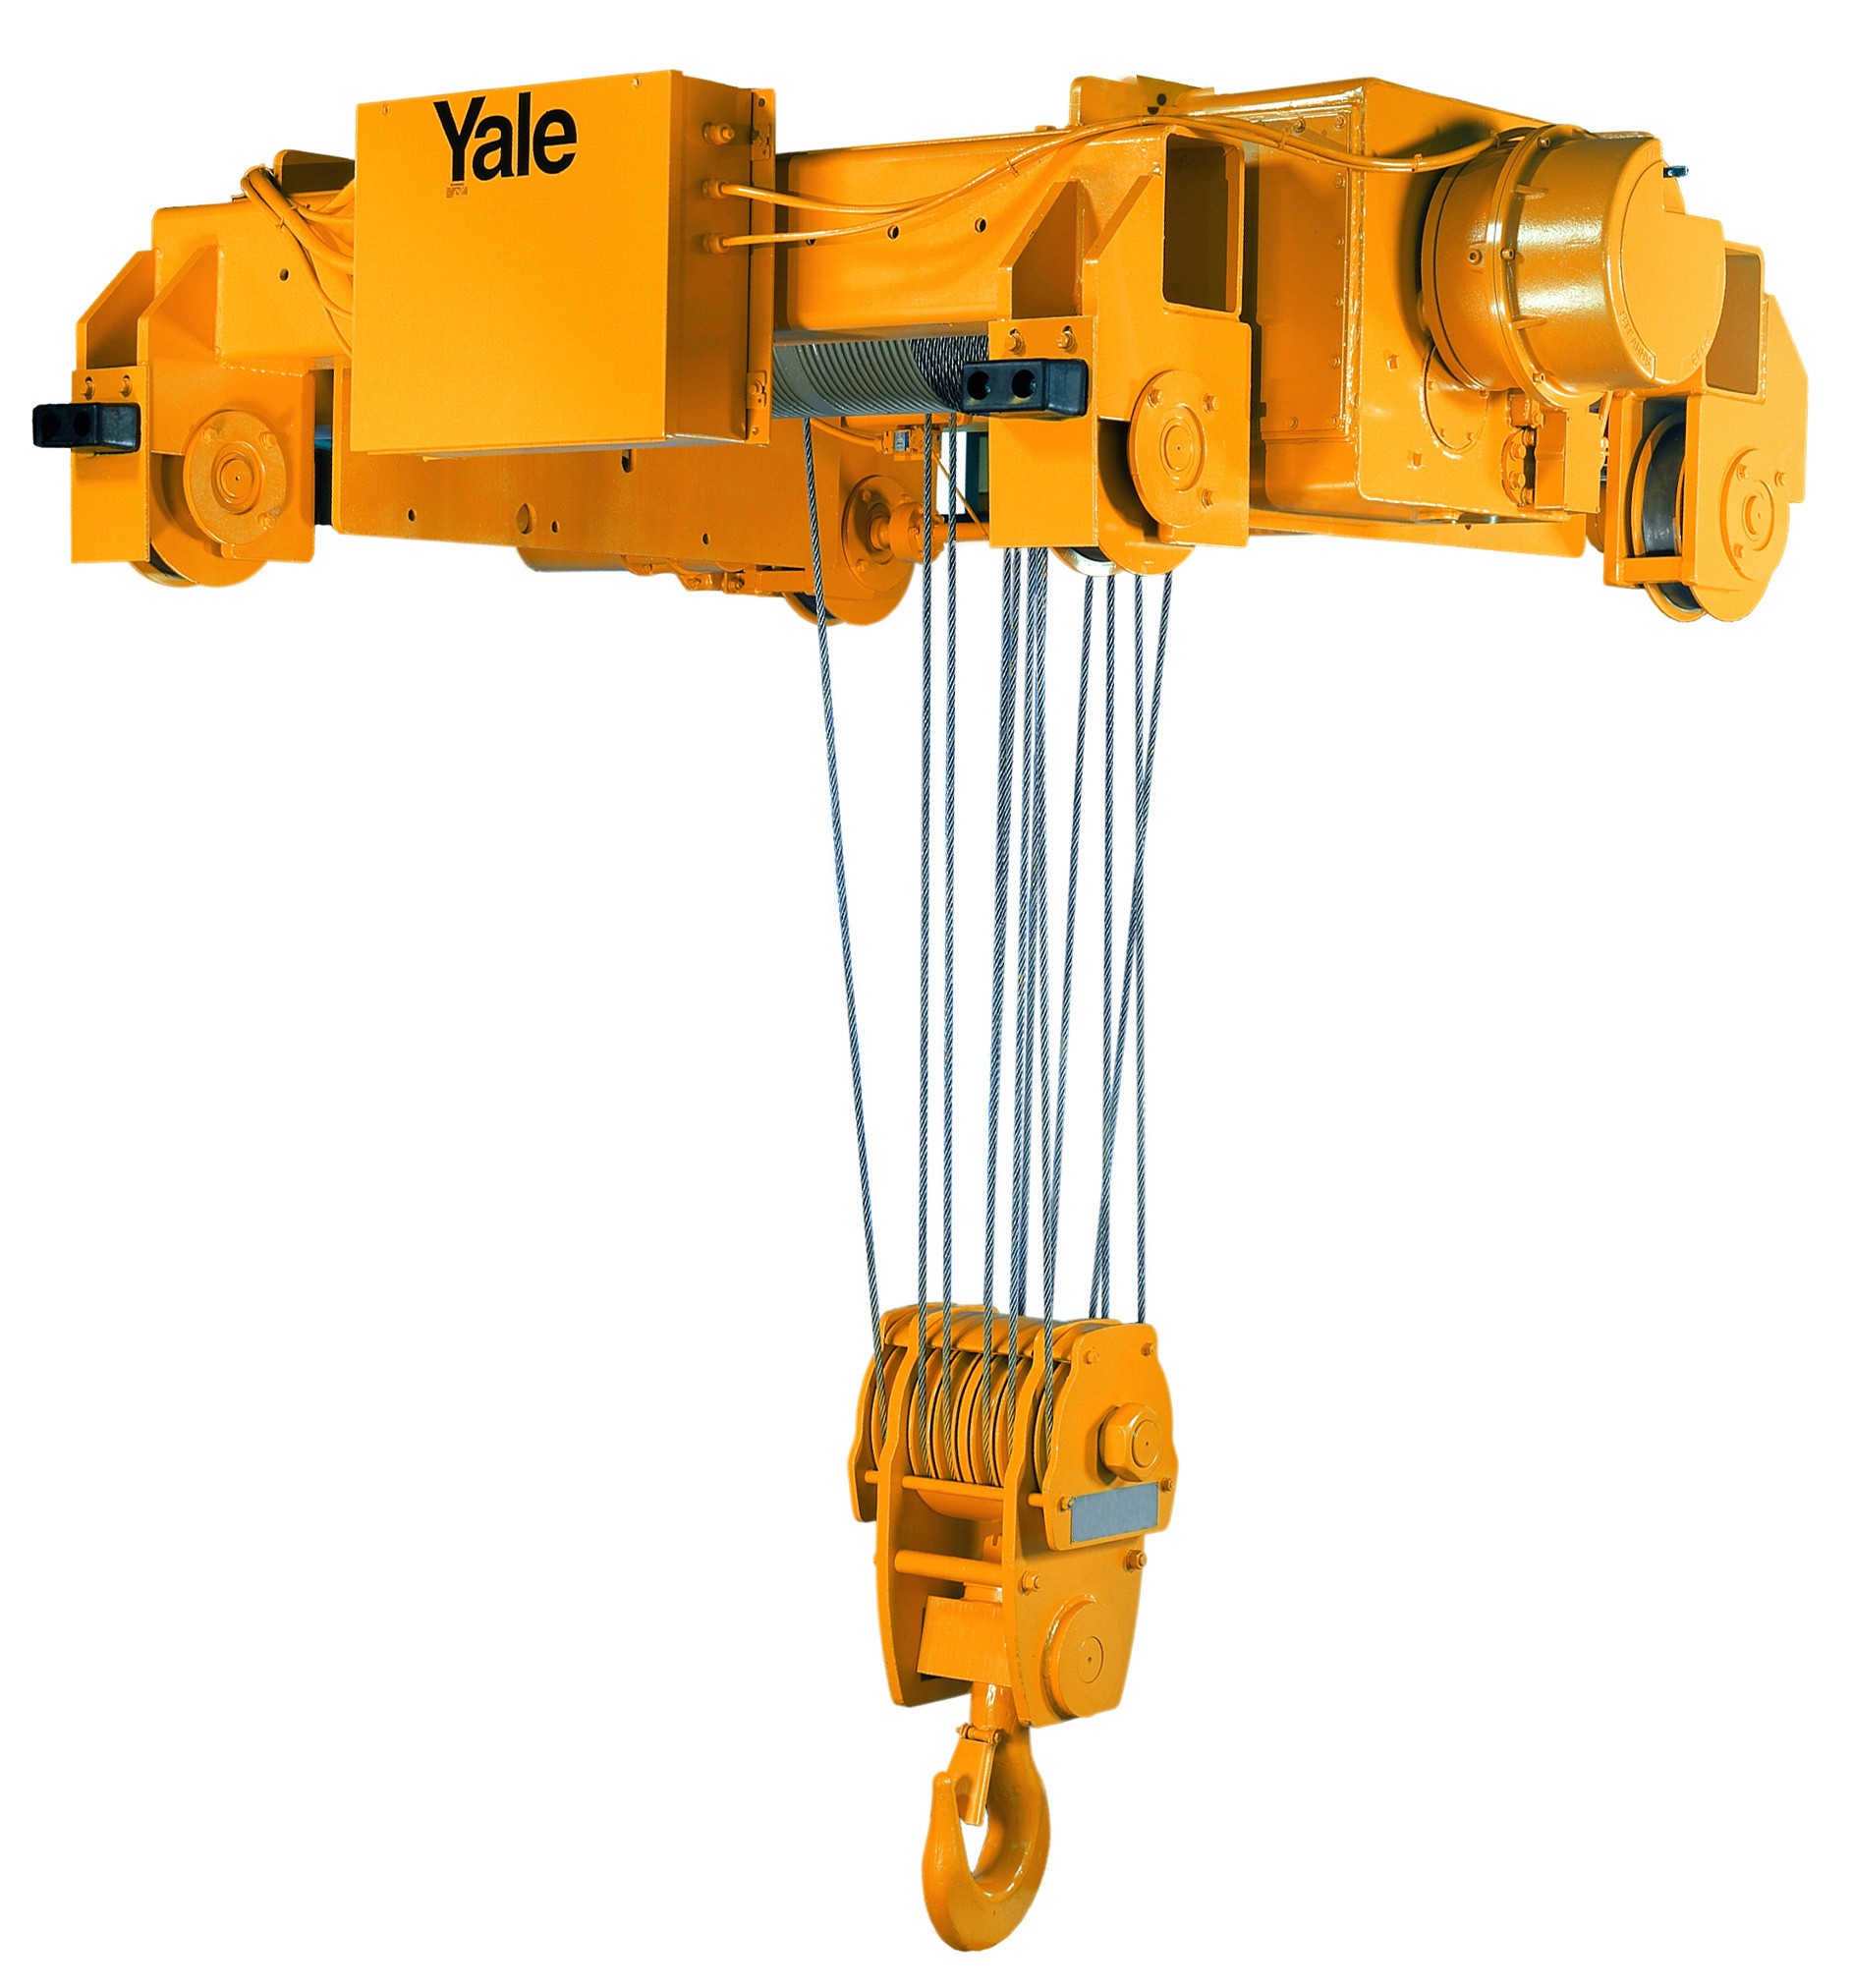 YALE - Cable King 10 Ton Electric Wire Rope Hoist (46fpm & 211' Lift Single Reeve)